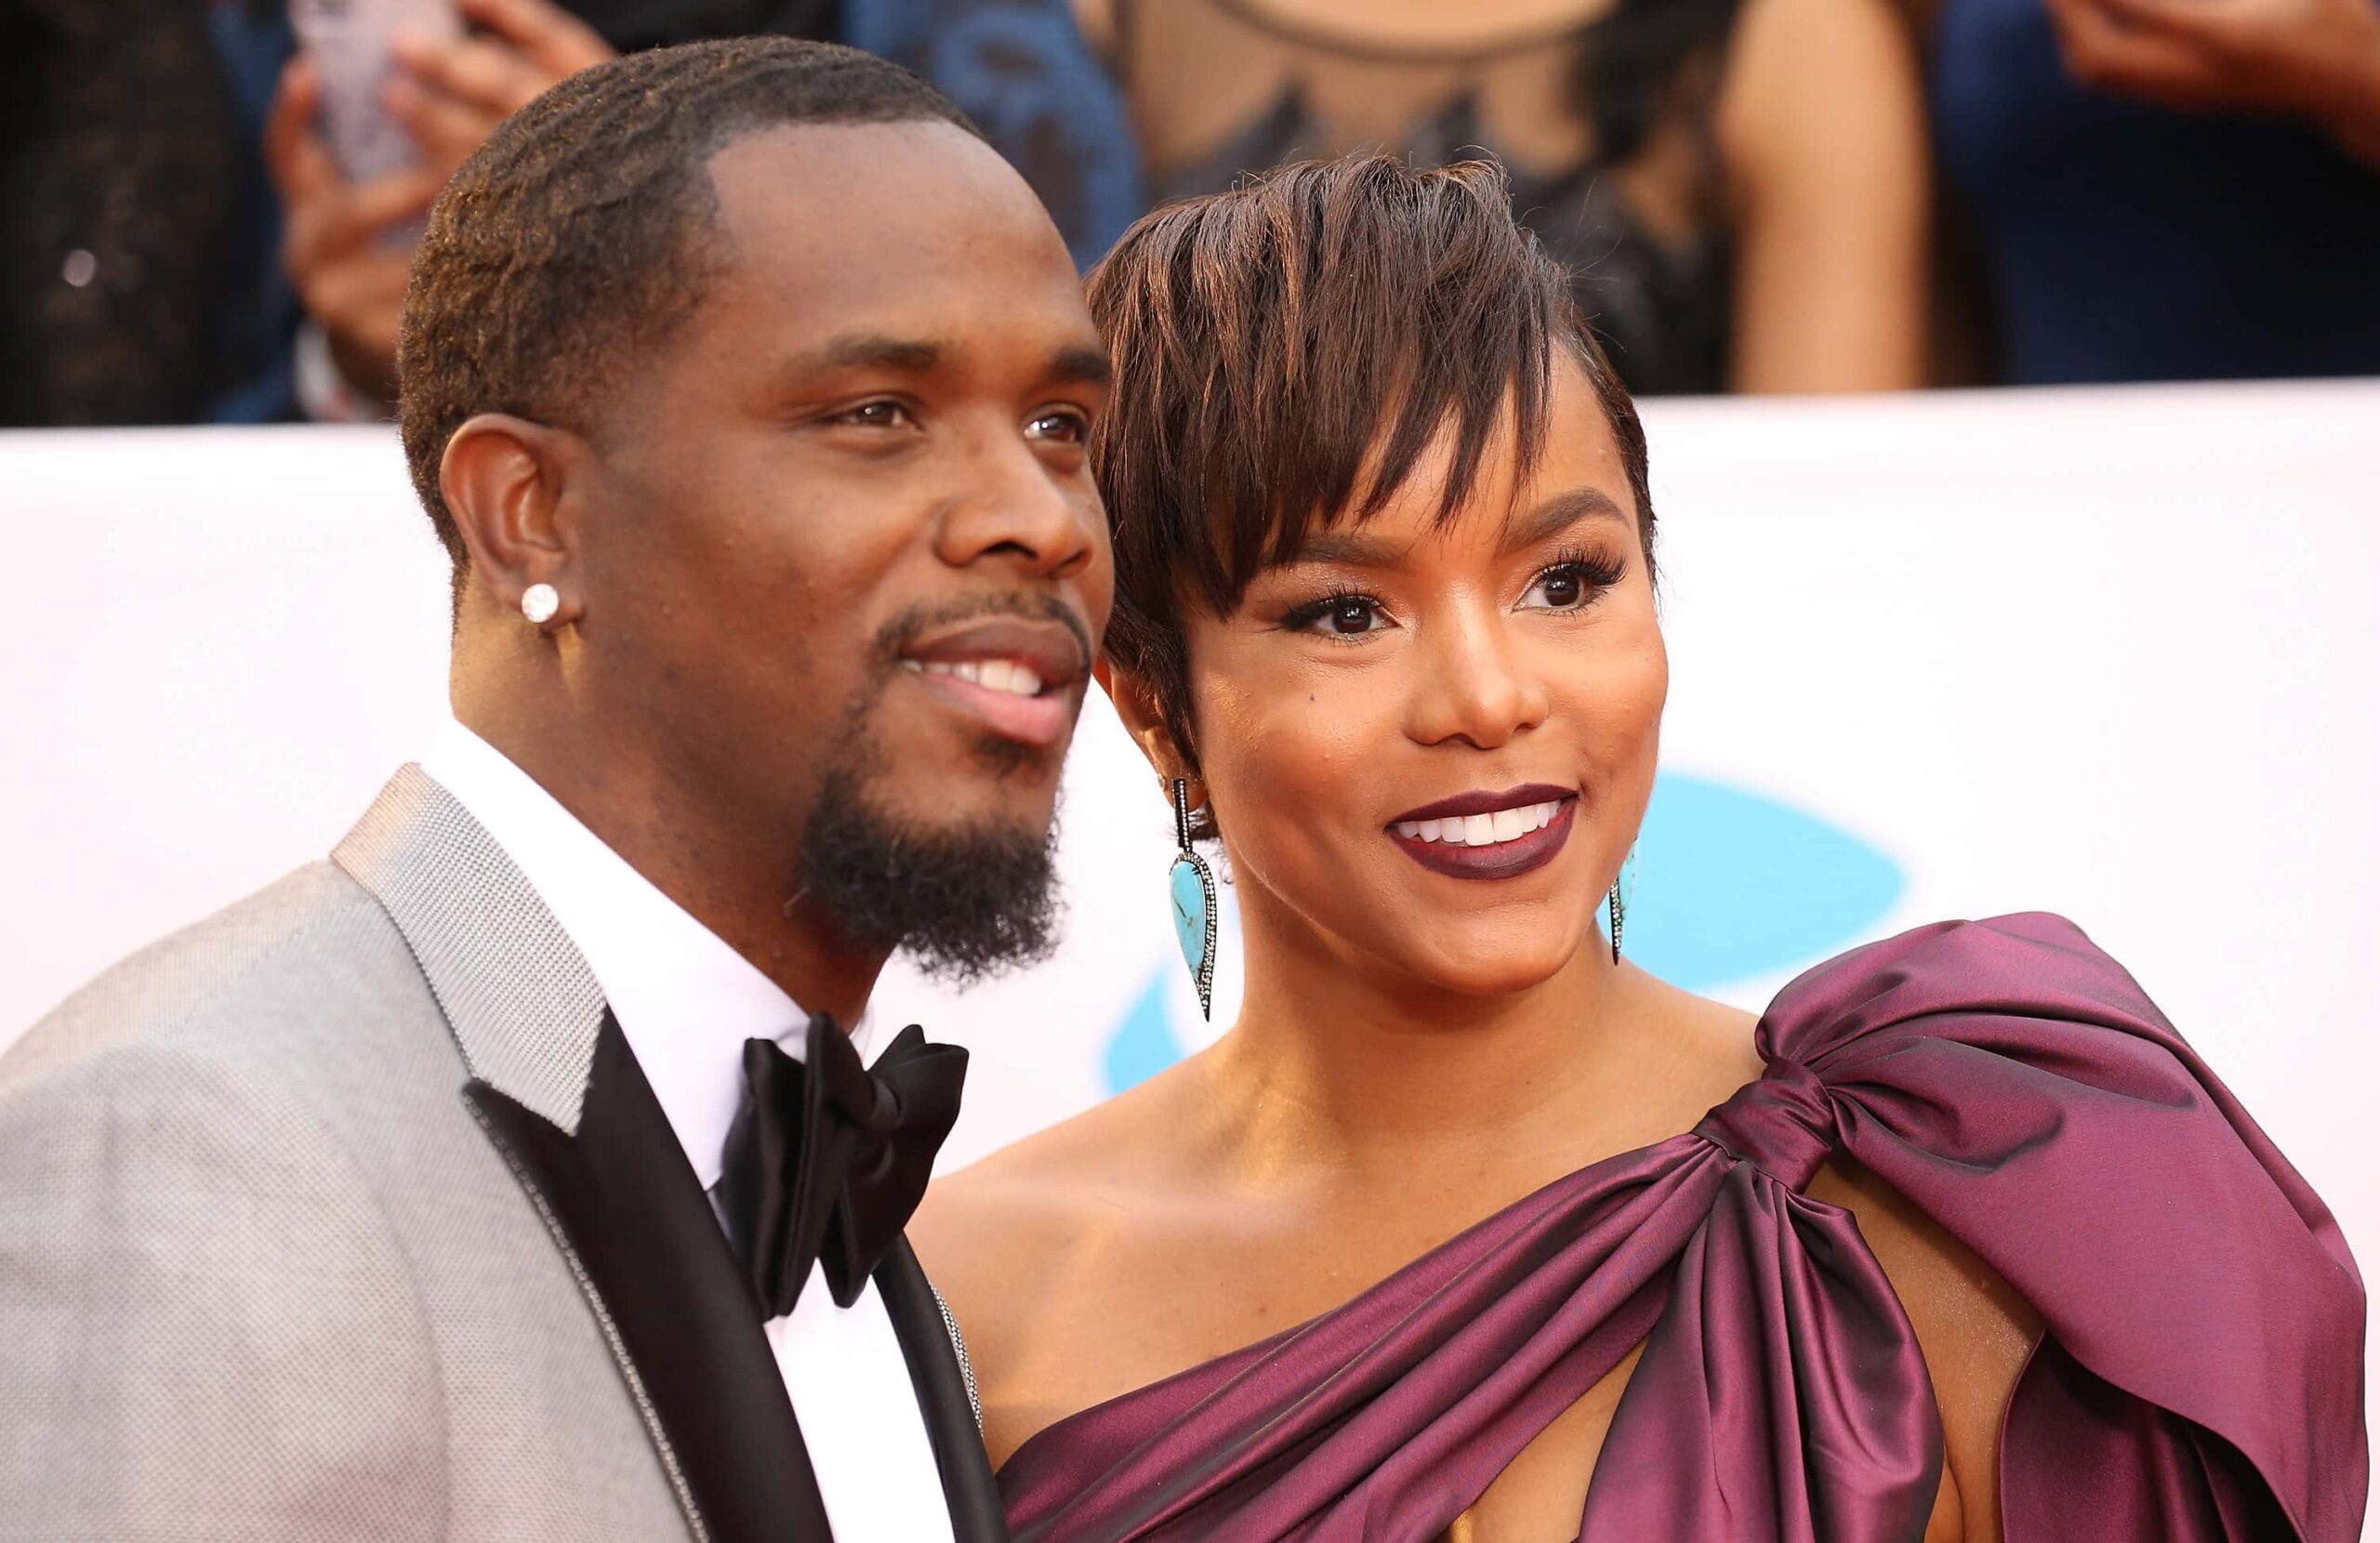 LeToya Luckett and Husband Announce Split and Vow to be "Loving Co-Parents"